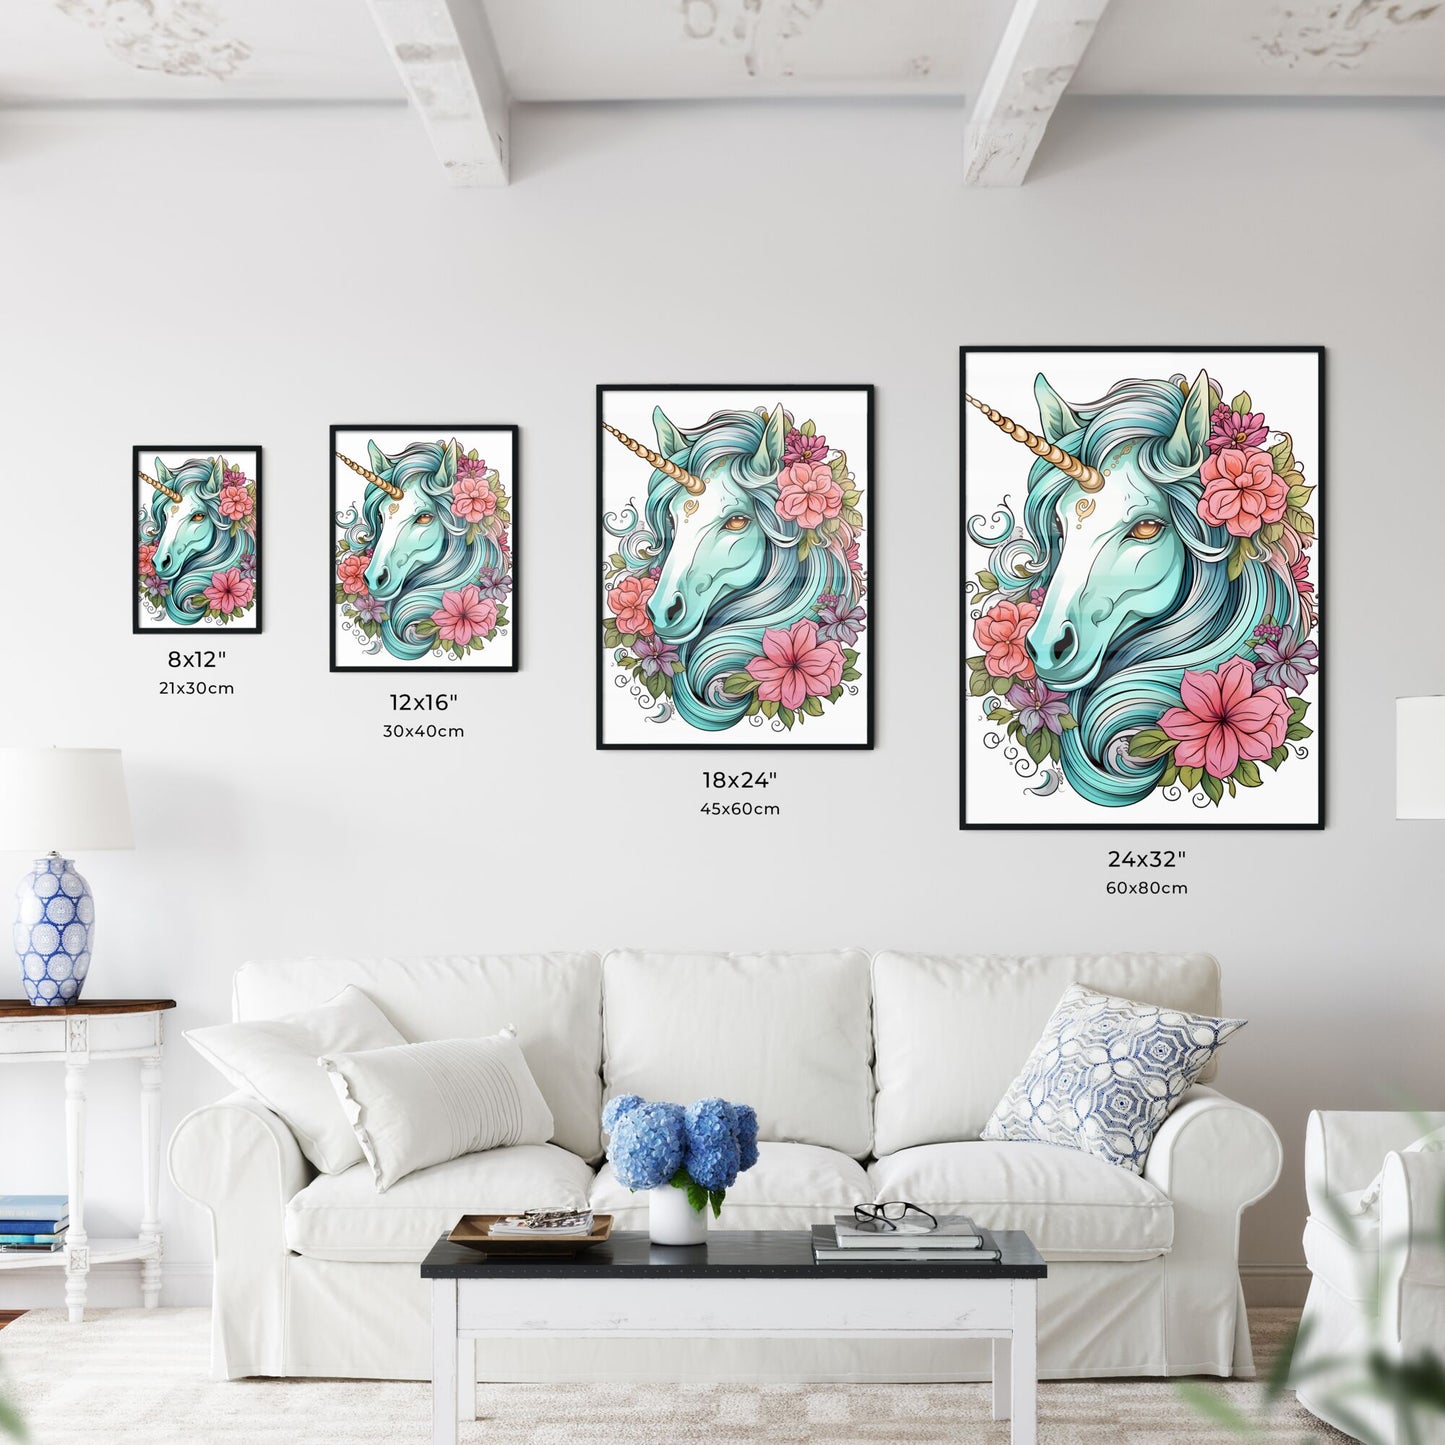 Unicorn With Flowers And Leaves Art Print Default Title